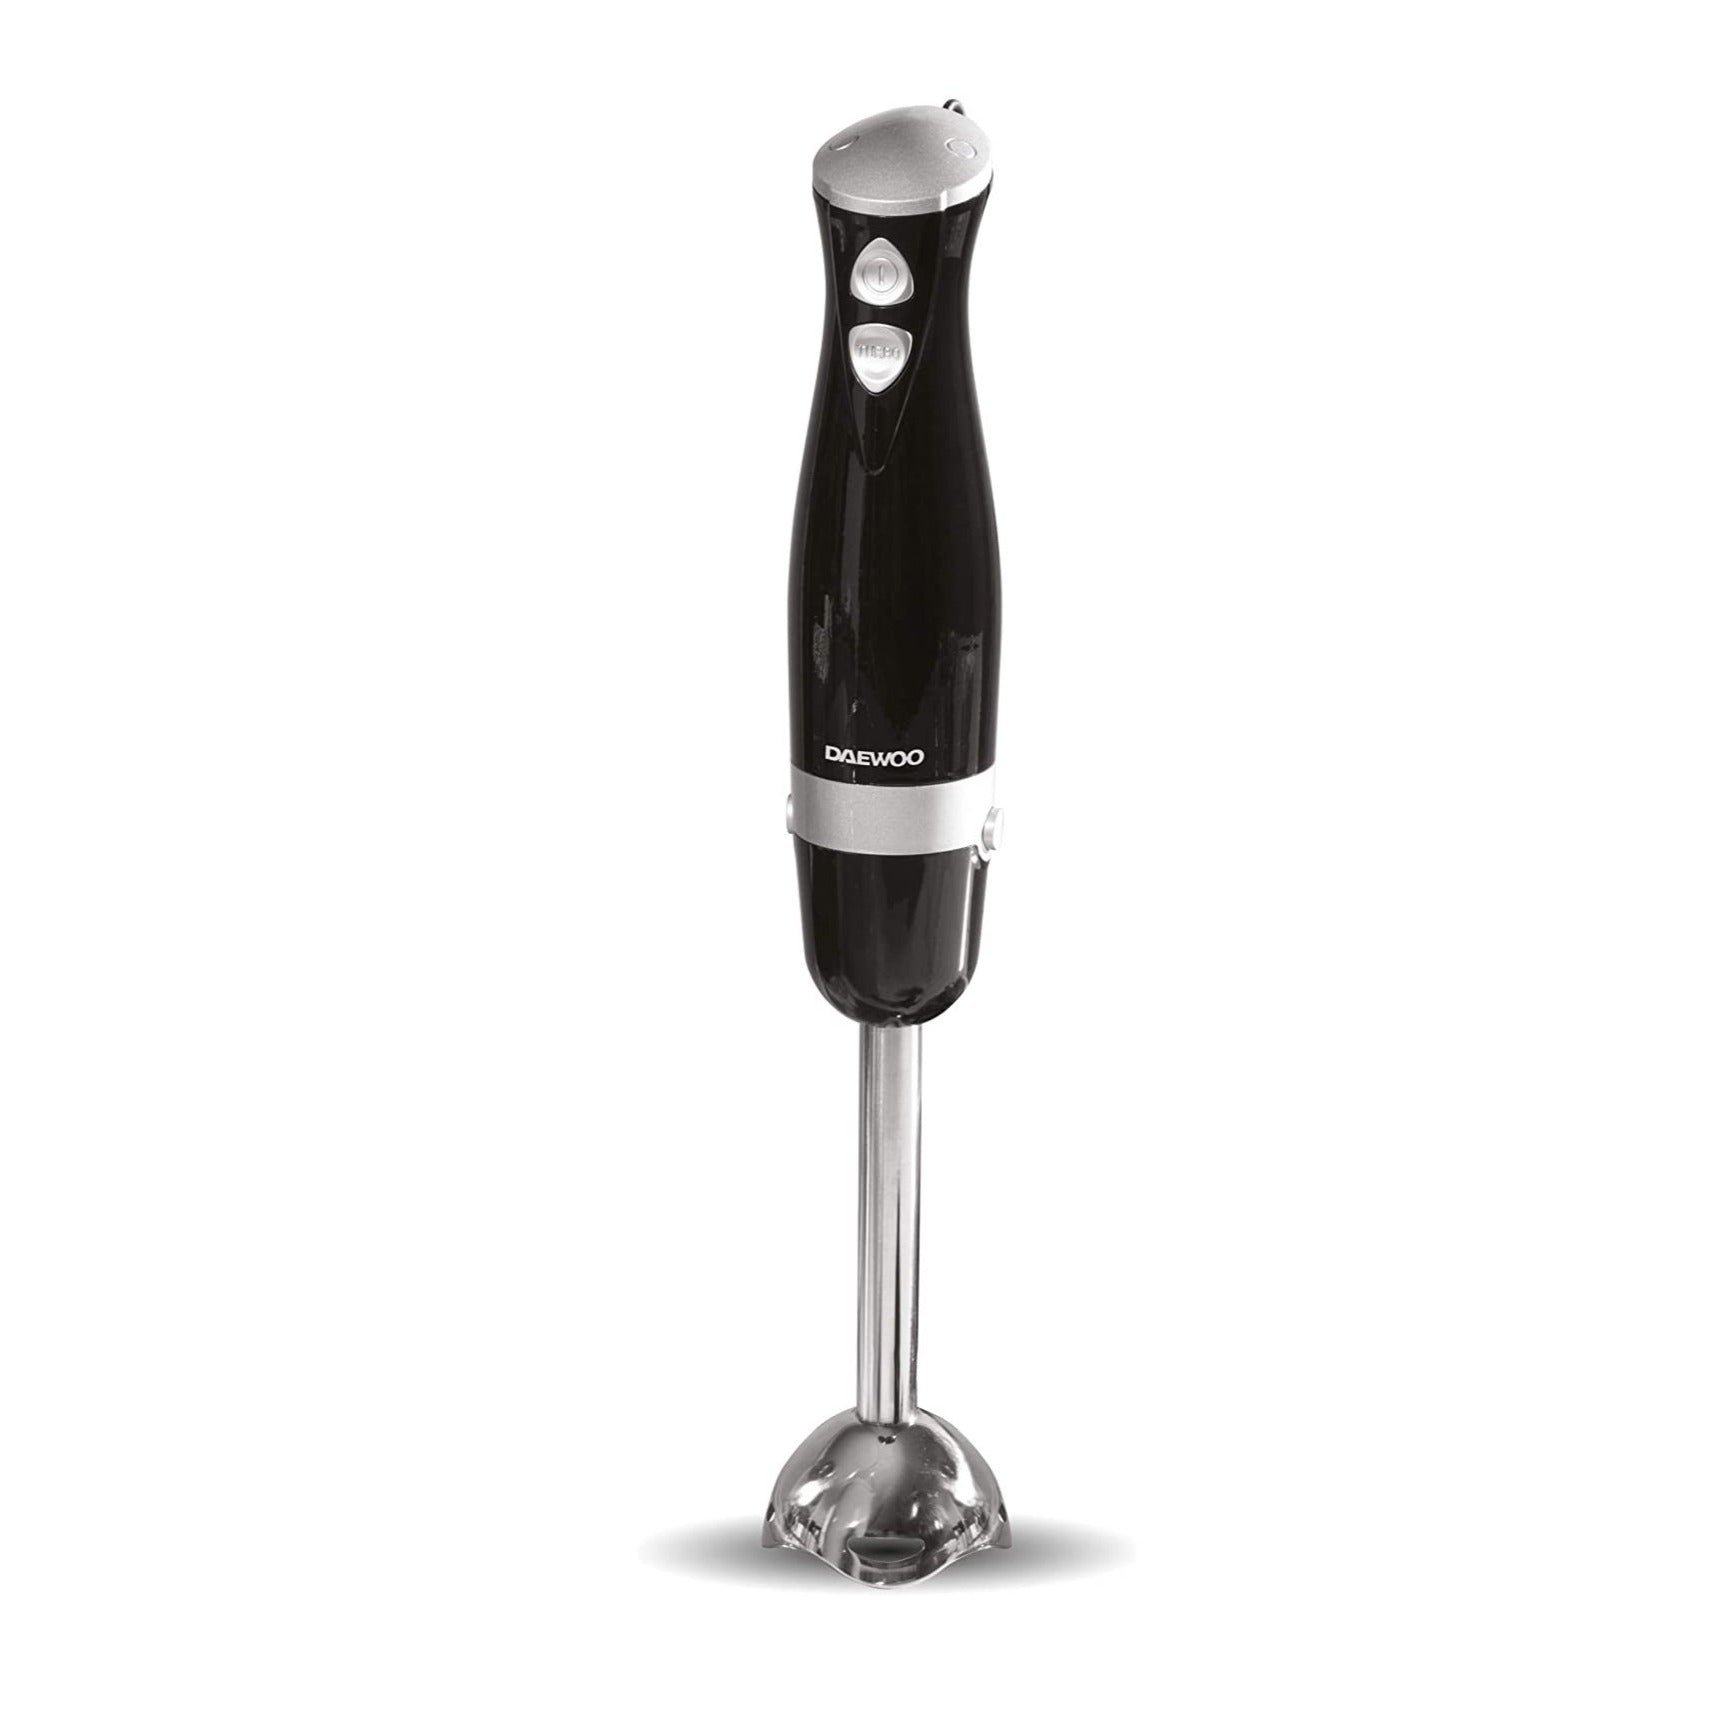 Daewoo 700W Hand Blender Set With Turbo Boost Function – Black & Silver SDA1622